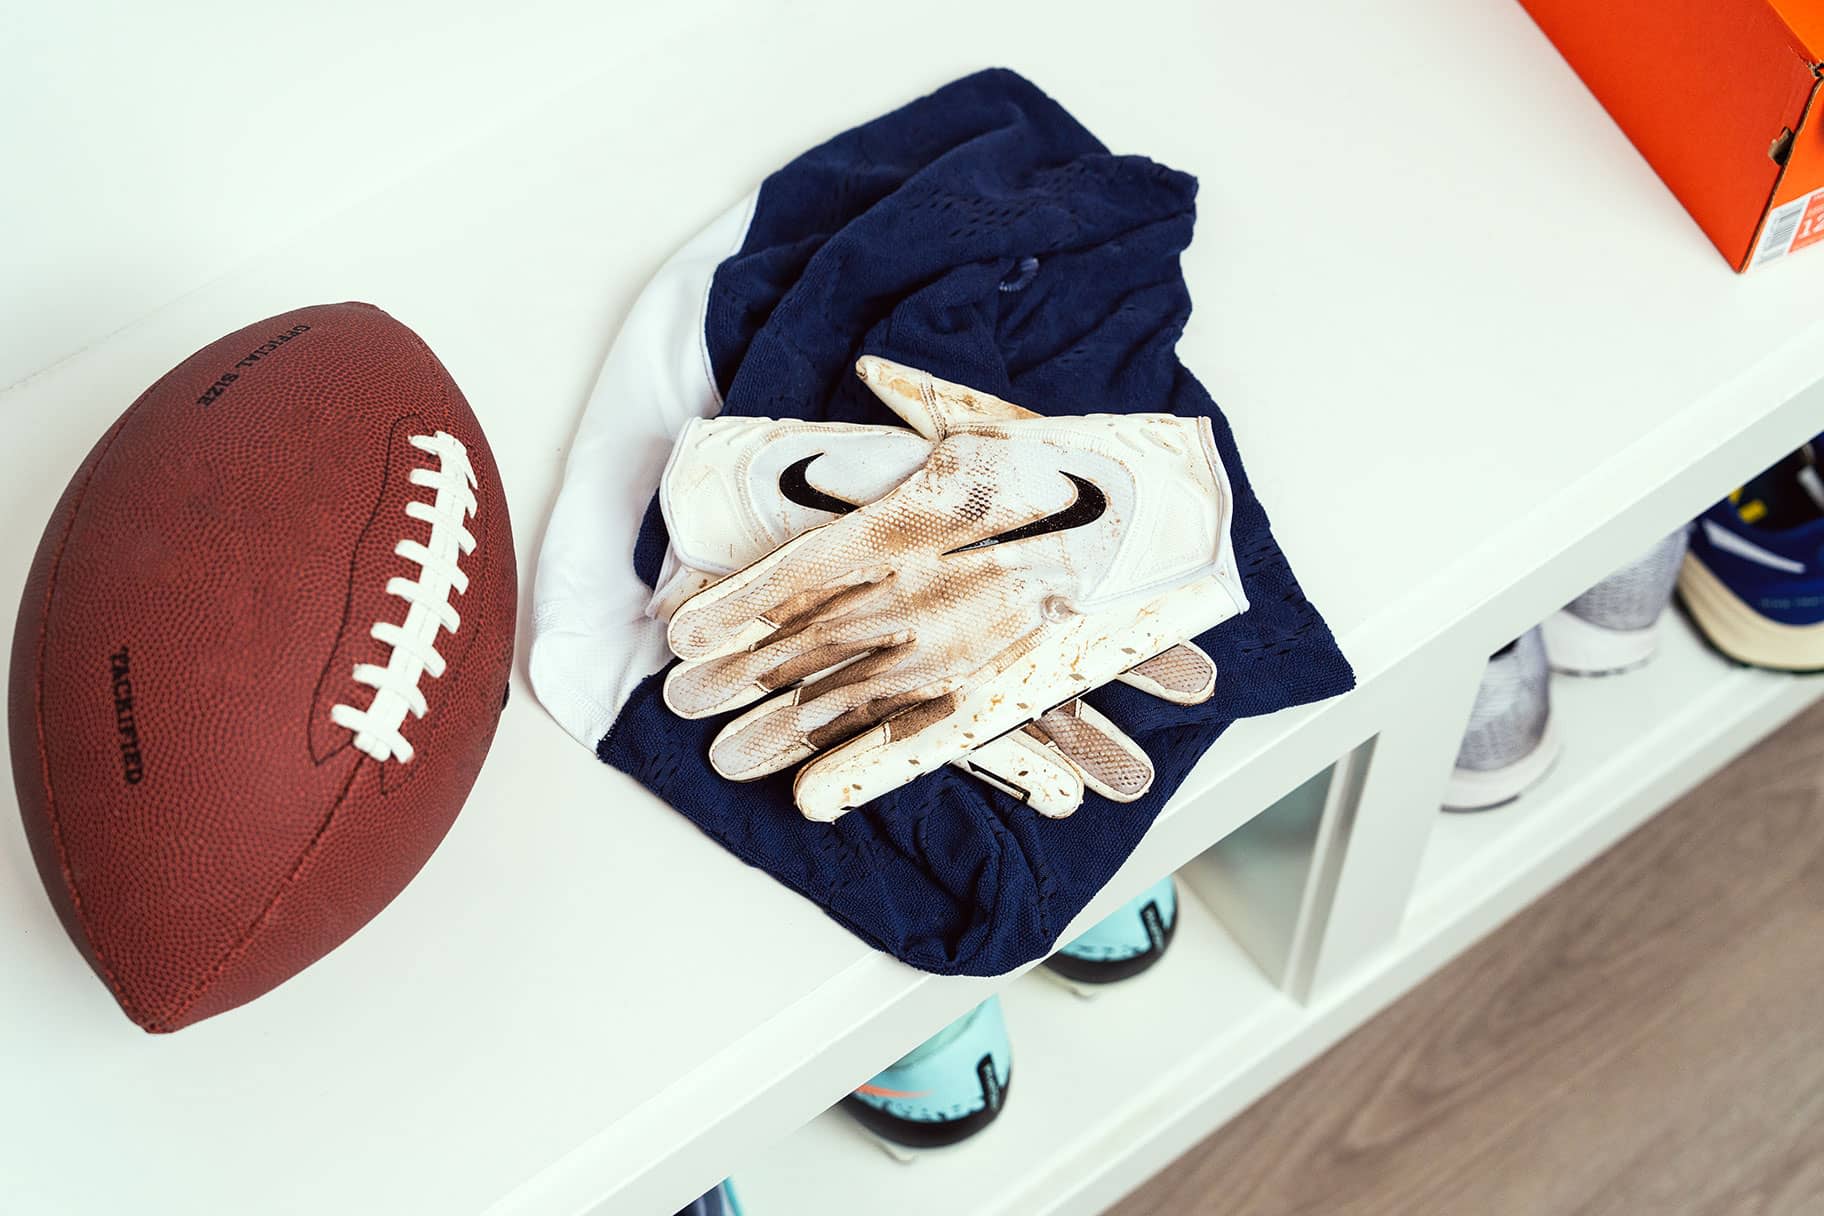 How to Clean American Football Gloves